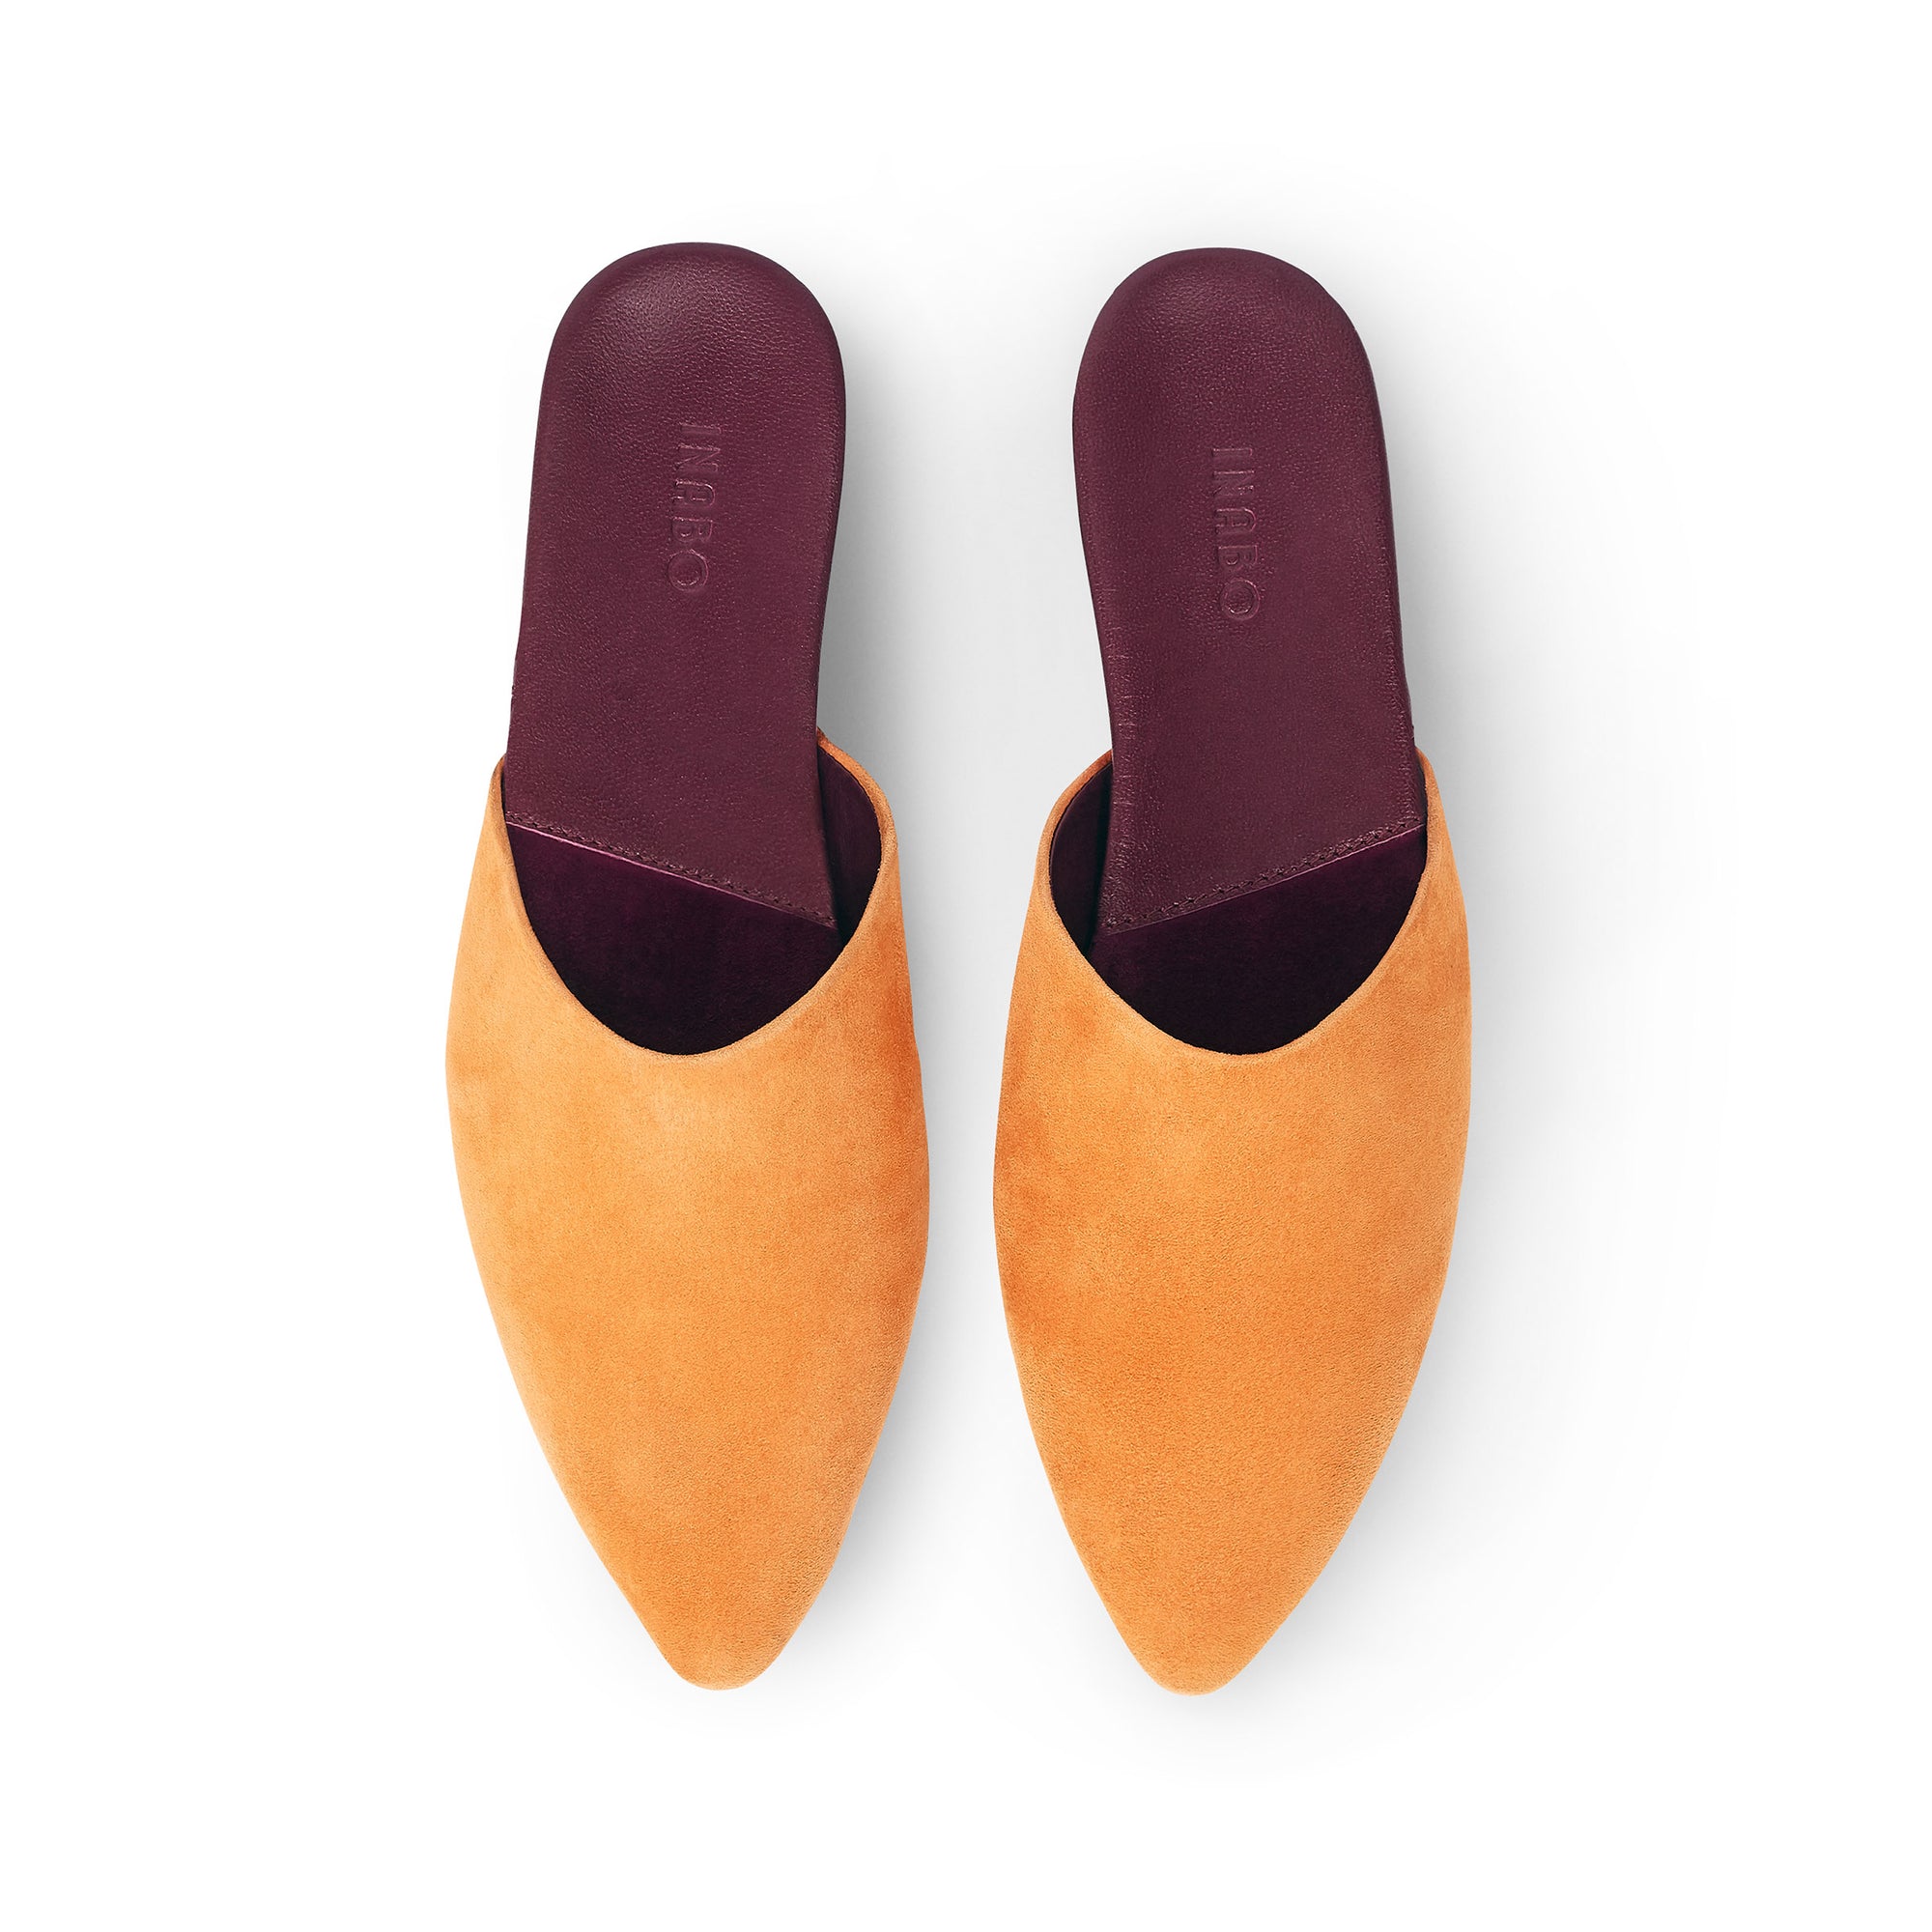 Inabo Women's Slider slipper in Saffron Suede and burgundy leather insole shown from above